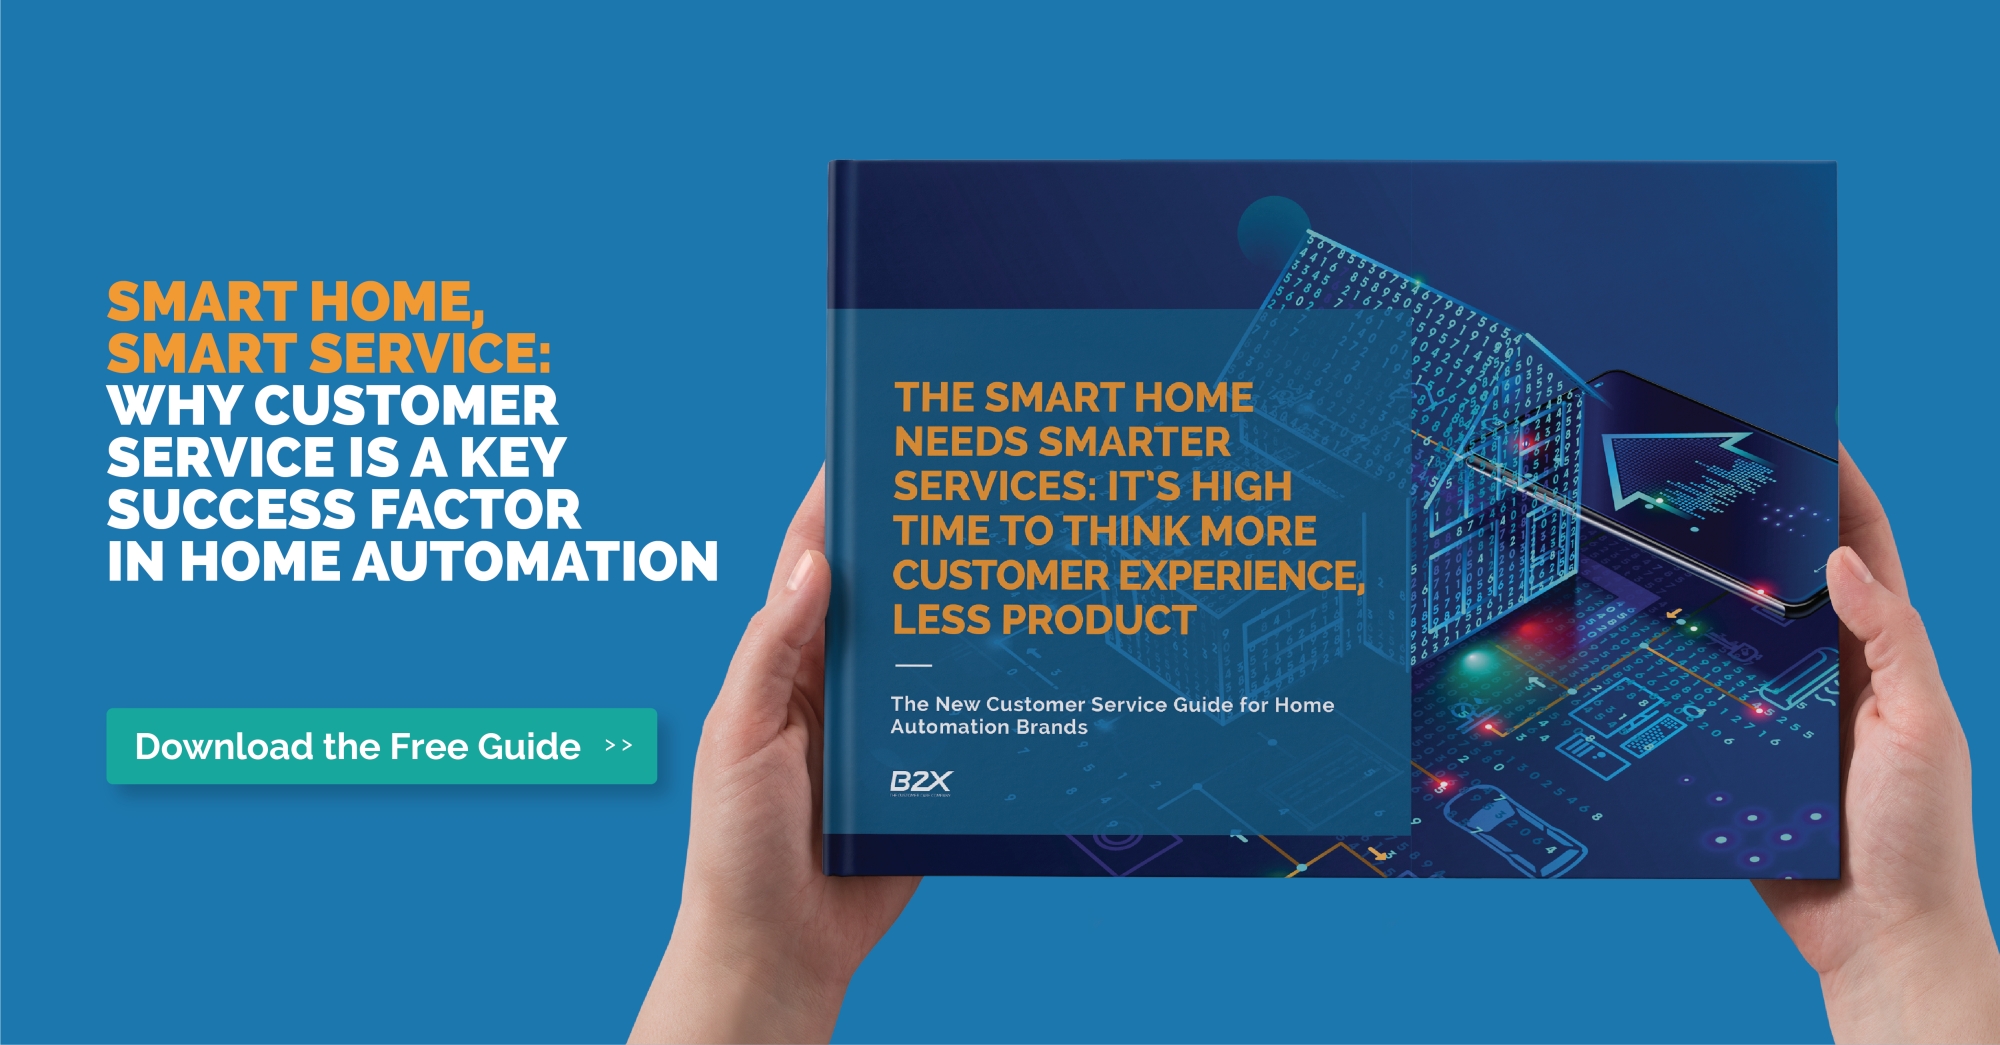 The new customer service guide for home automation and smart home brands